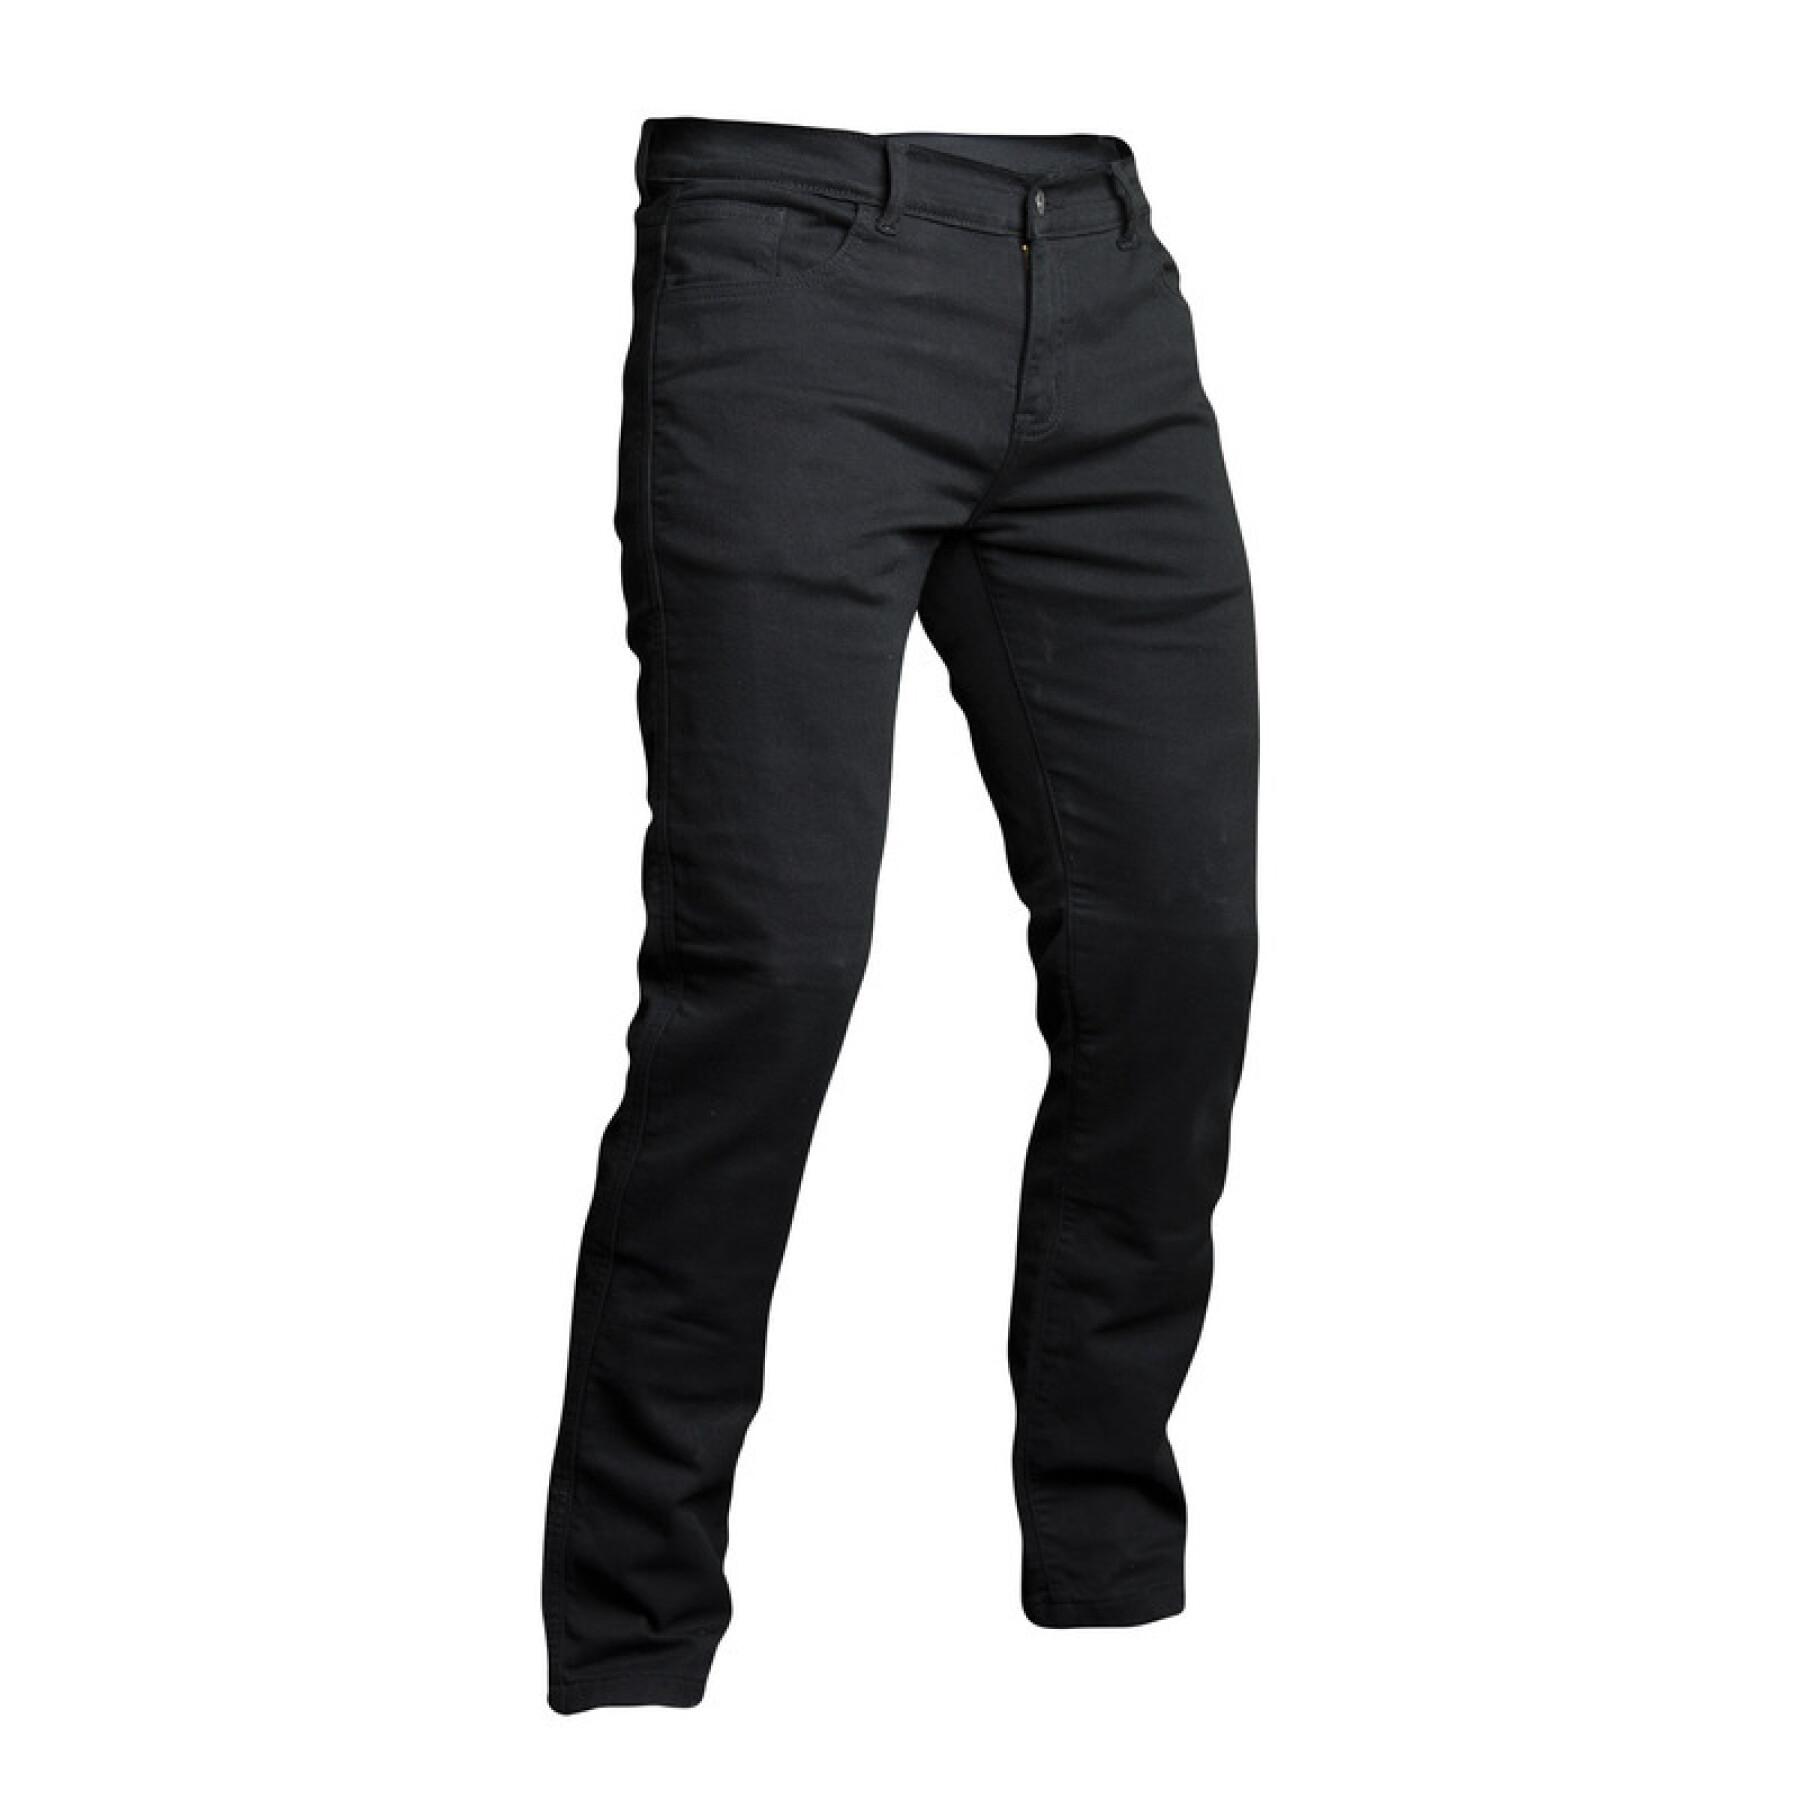 Short motorcycle jeans RST Aramid Metro CE